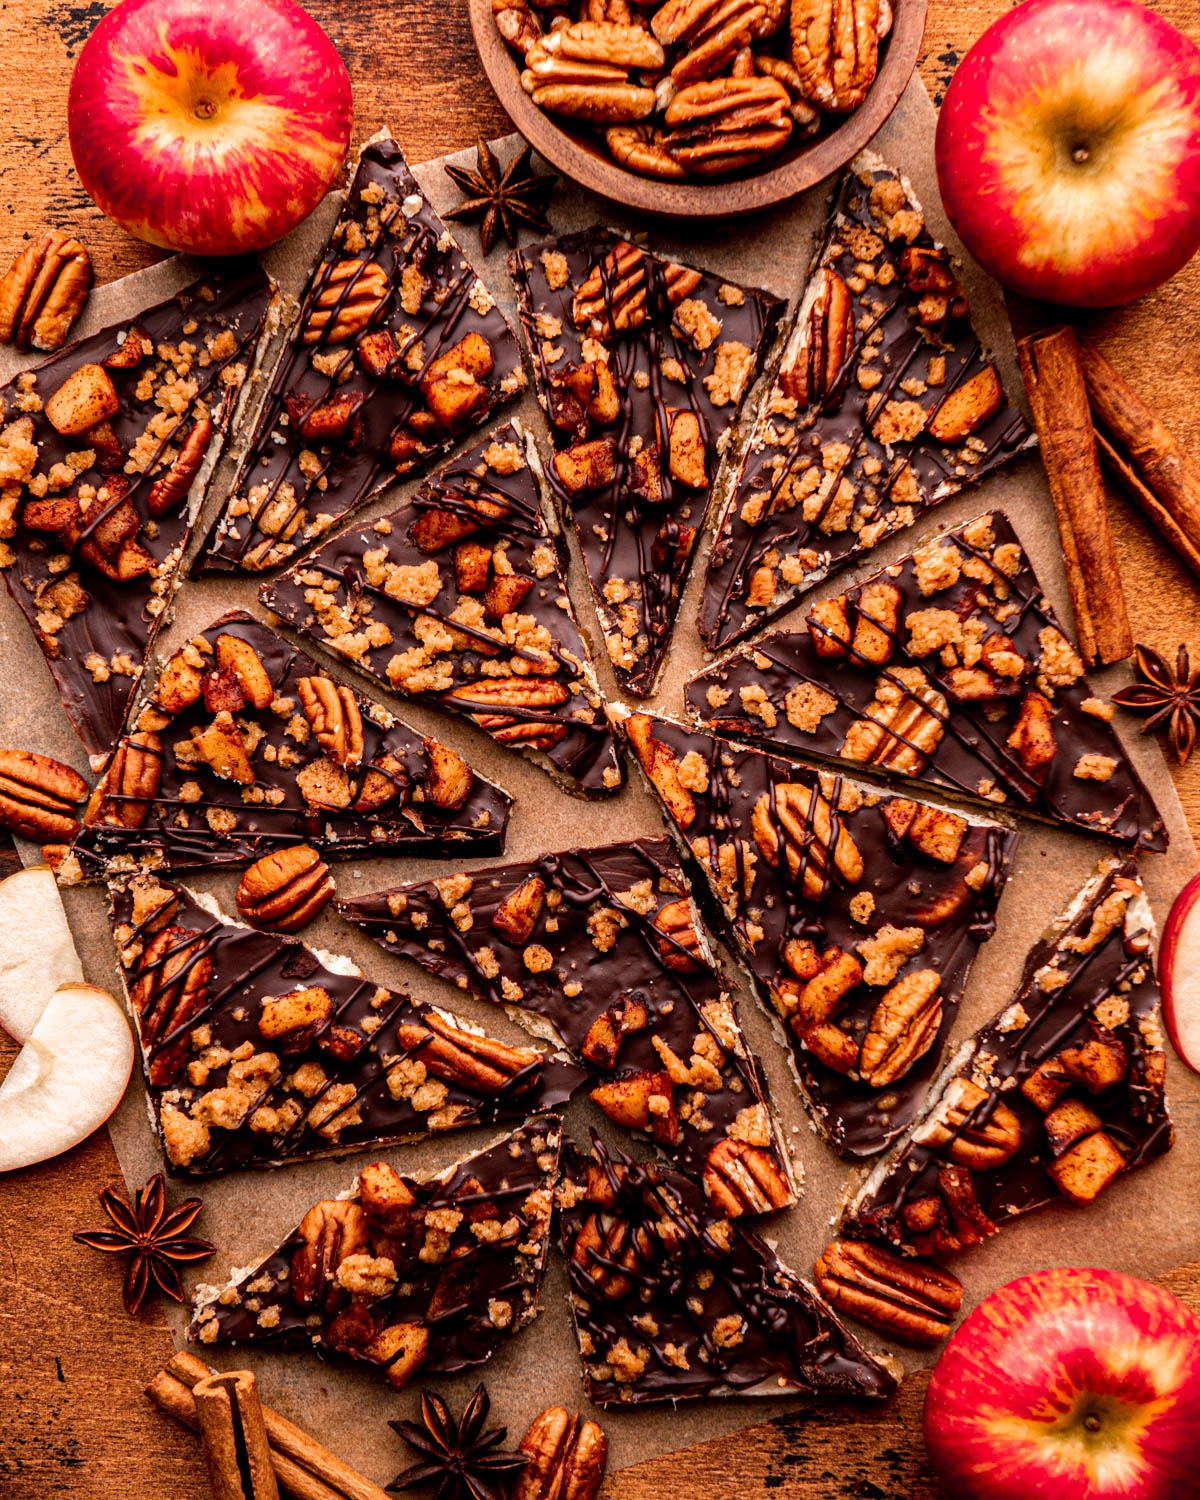 Thanksgiving cracker toffee pieces arranged on parchment paper with cinnamon sticks, apples and pecans near by